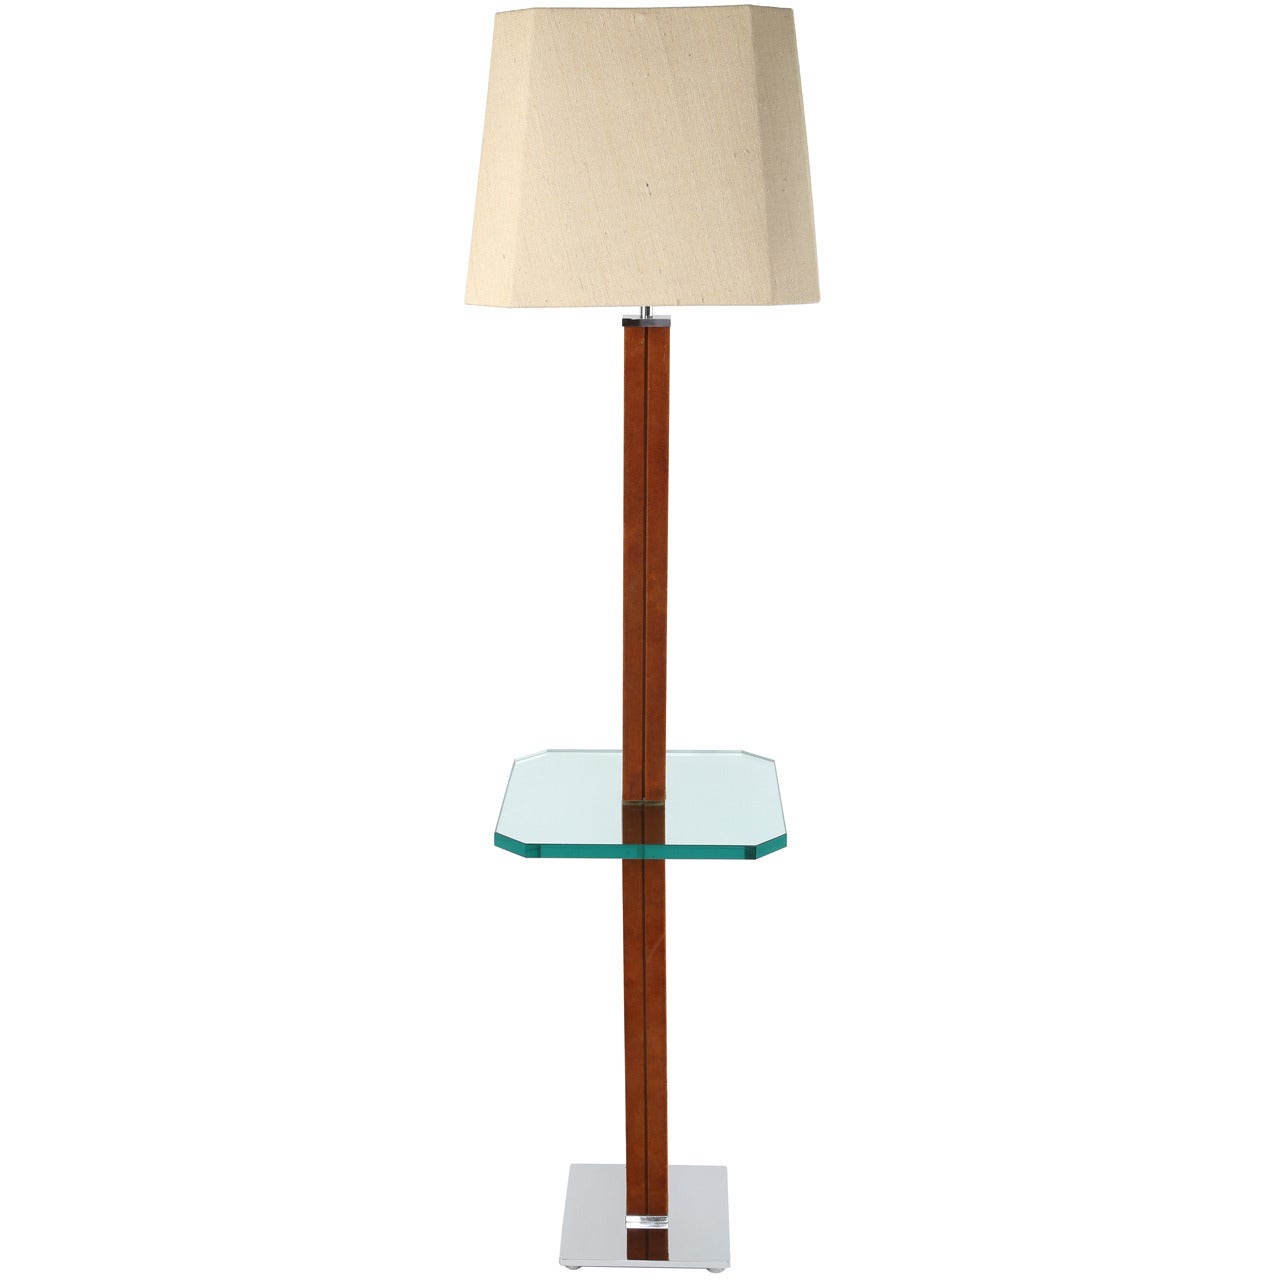 1970s Karl Springer Chrome, Suede and Glass Lamp Table For Sale